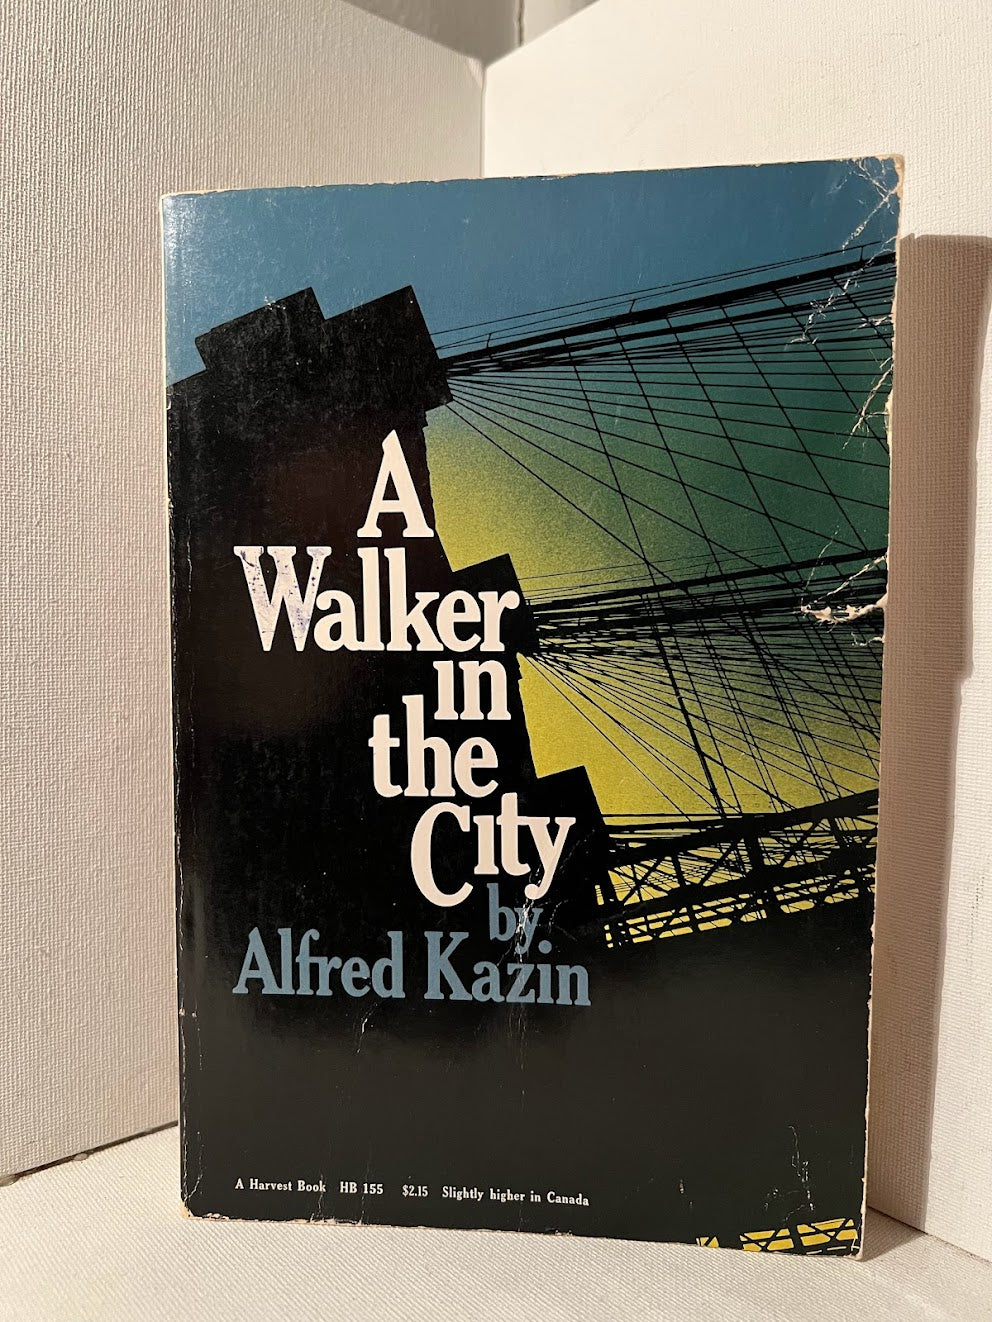 A Walker in the City by Alfred Kazin